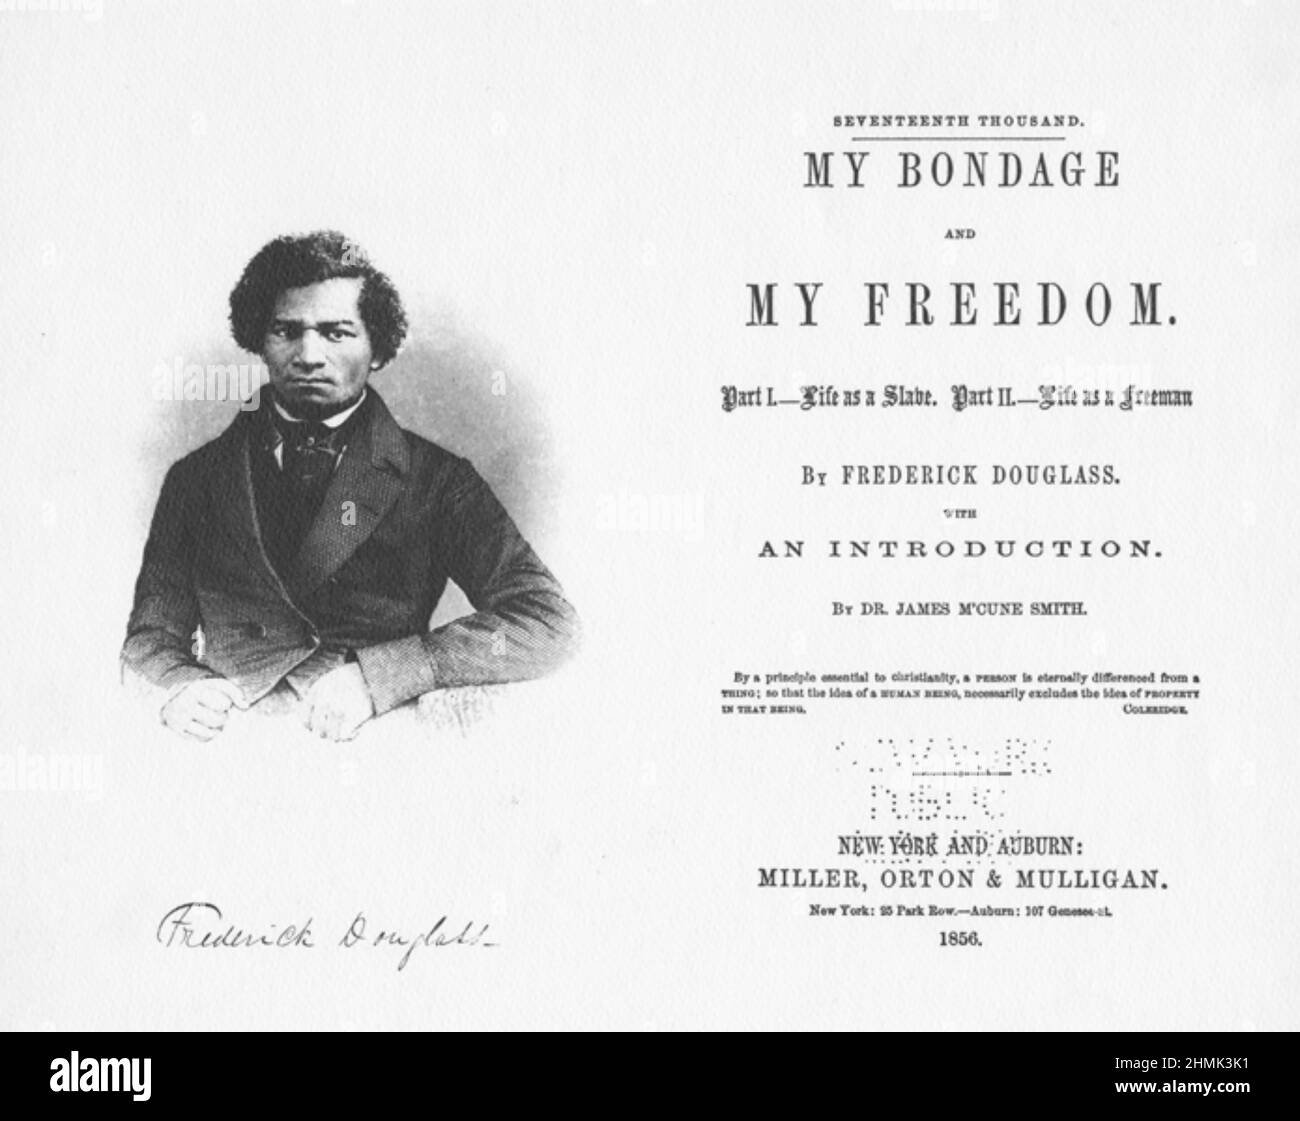 FREDERICK DOUGLASS (1817/1818-1895) American social reformer and abolitionist. His 1855 second biography My Bondage and My Freedom. Stock Photo